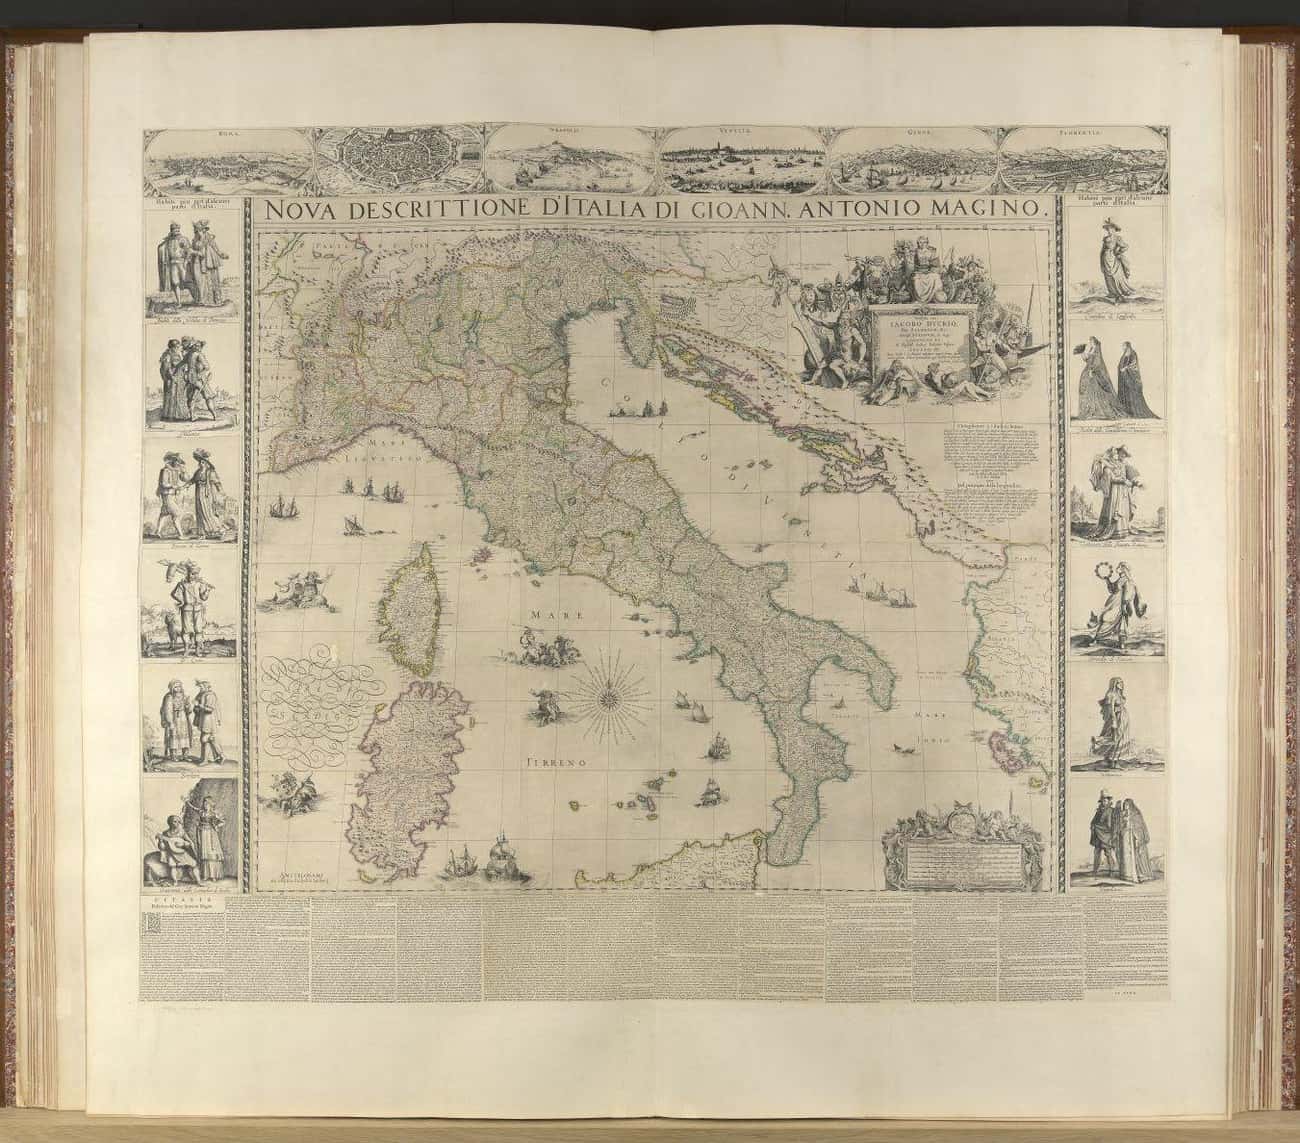 A 1660 Atlas That’s One Of The Biggest In The World